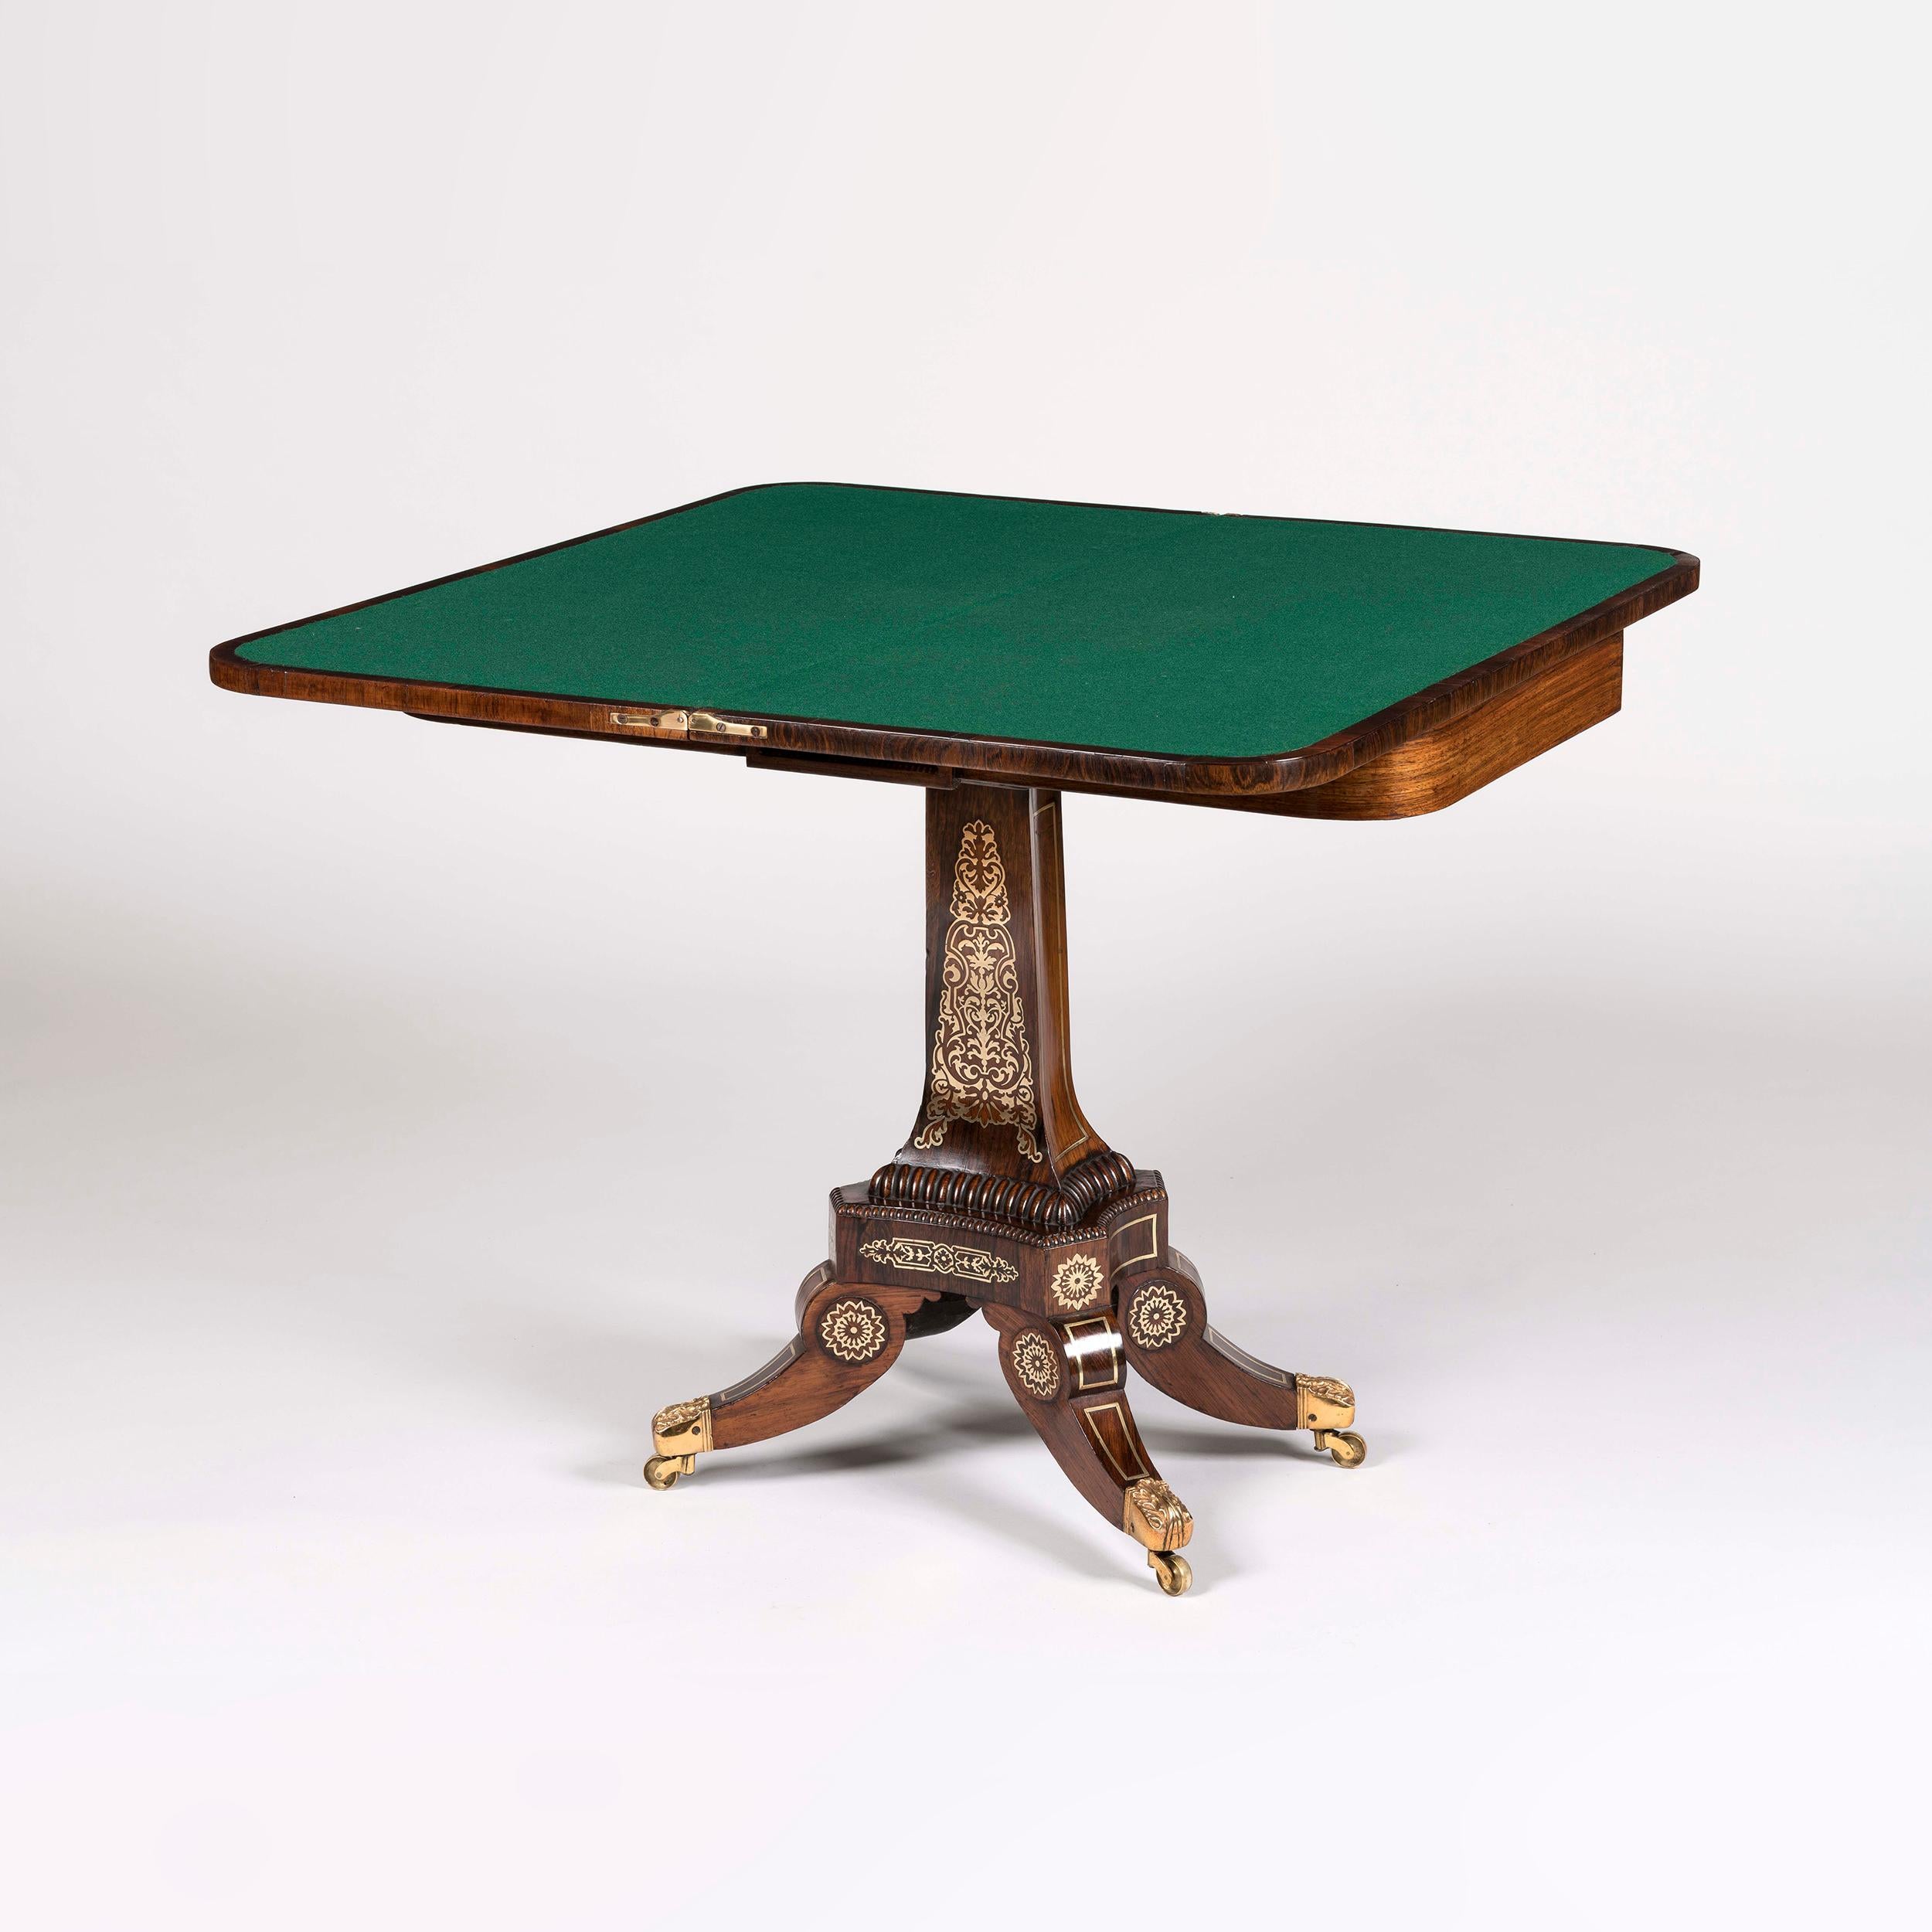 A pair of Regency card tables
 
Constructed in Gonçalo Alves, and dressed with extensive brass marquetry work; rising from quadripartite swept legs terminating in brass anthemion decorated toes with inset brass castors, conjoining incurved